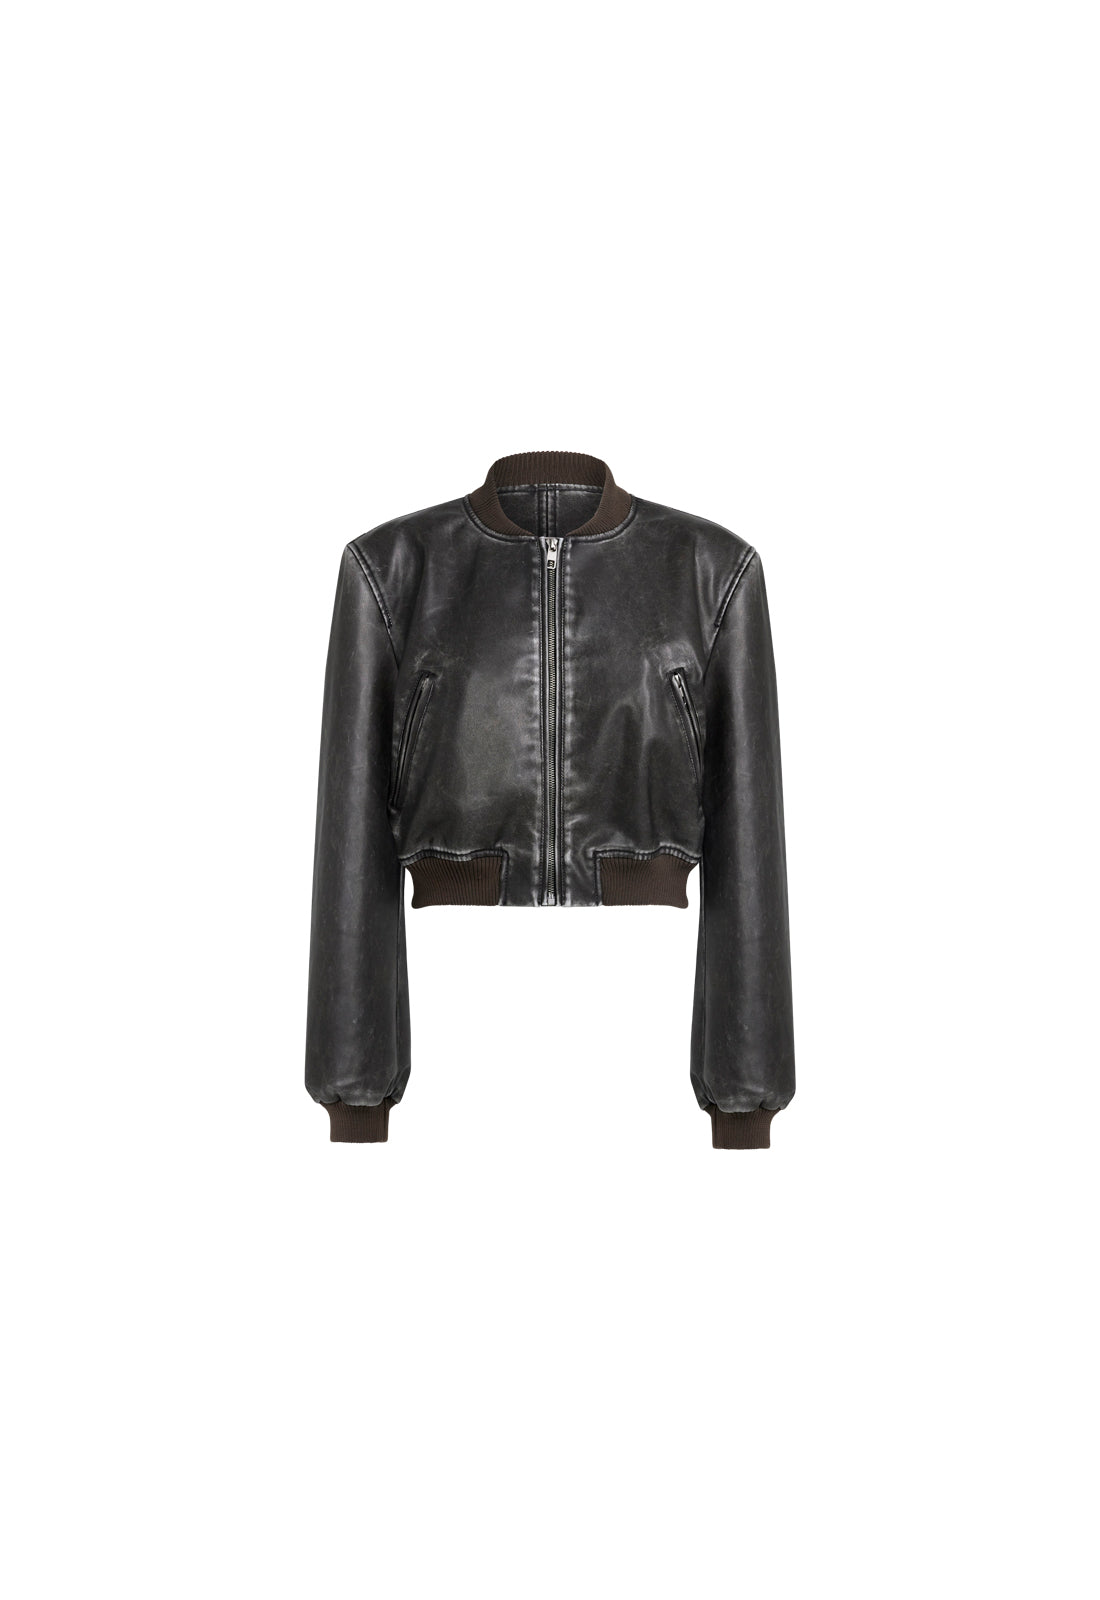 ALLURE BOMBER - CHARCOAL